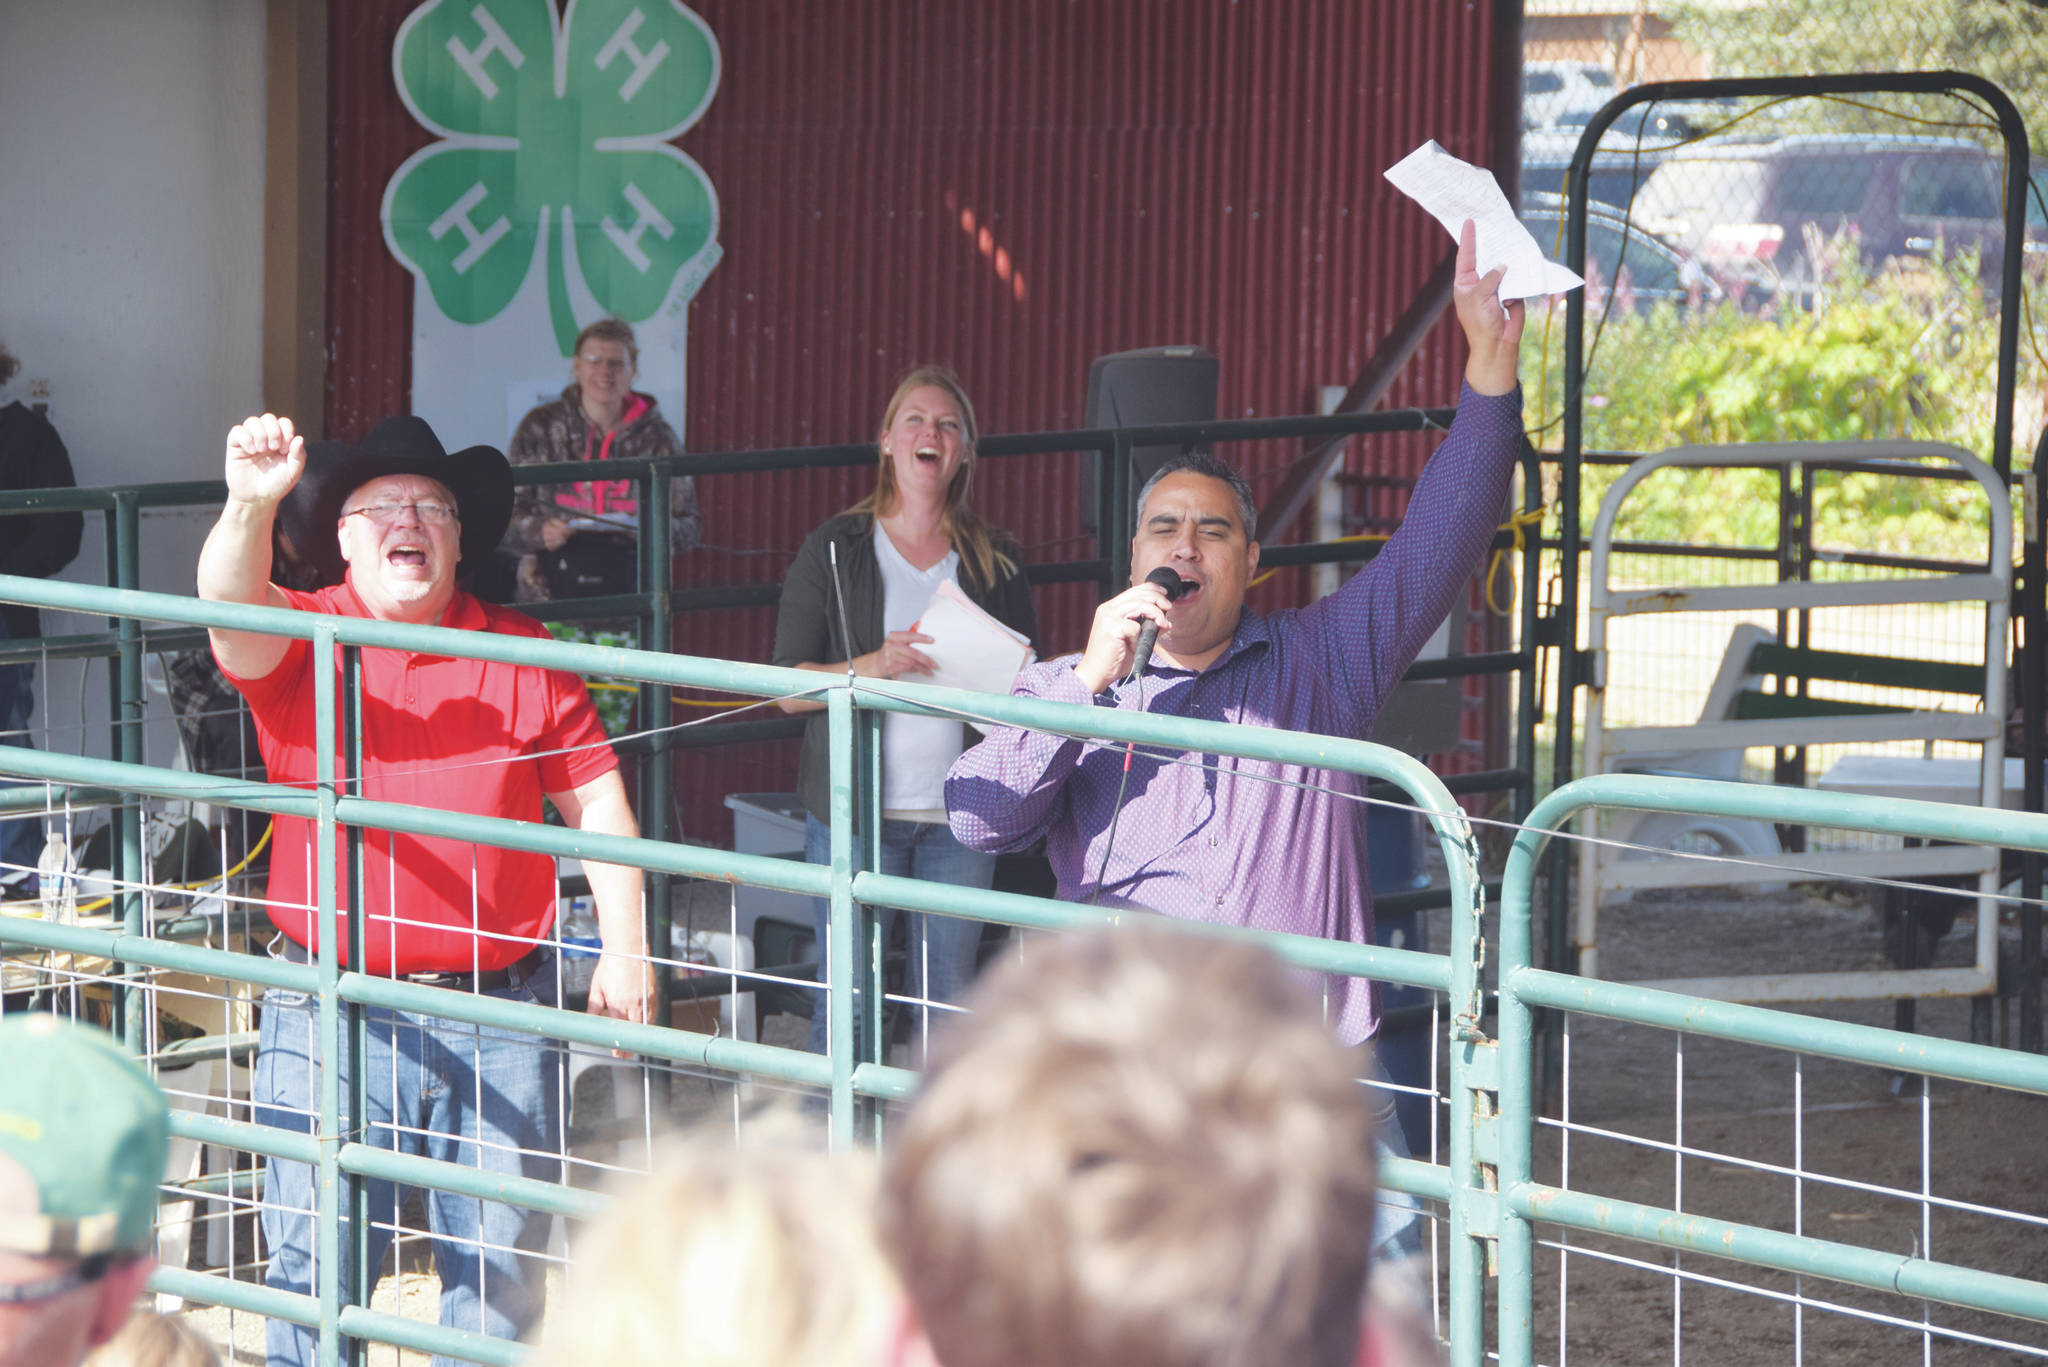 Auctioneers Andy Kriner, left, and Rayne, Reynolds celebrate a successful sale during the 4H Junior Market Livestock Auction at the Kenai Peninsula Fair on Aug. 17, 2019 at the fairgrounds in Ninilchik, Alaska. (Photo by Brian Mazurek/Peninsula Clarion)